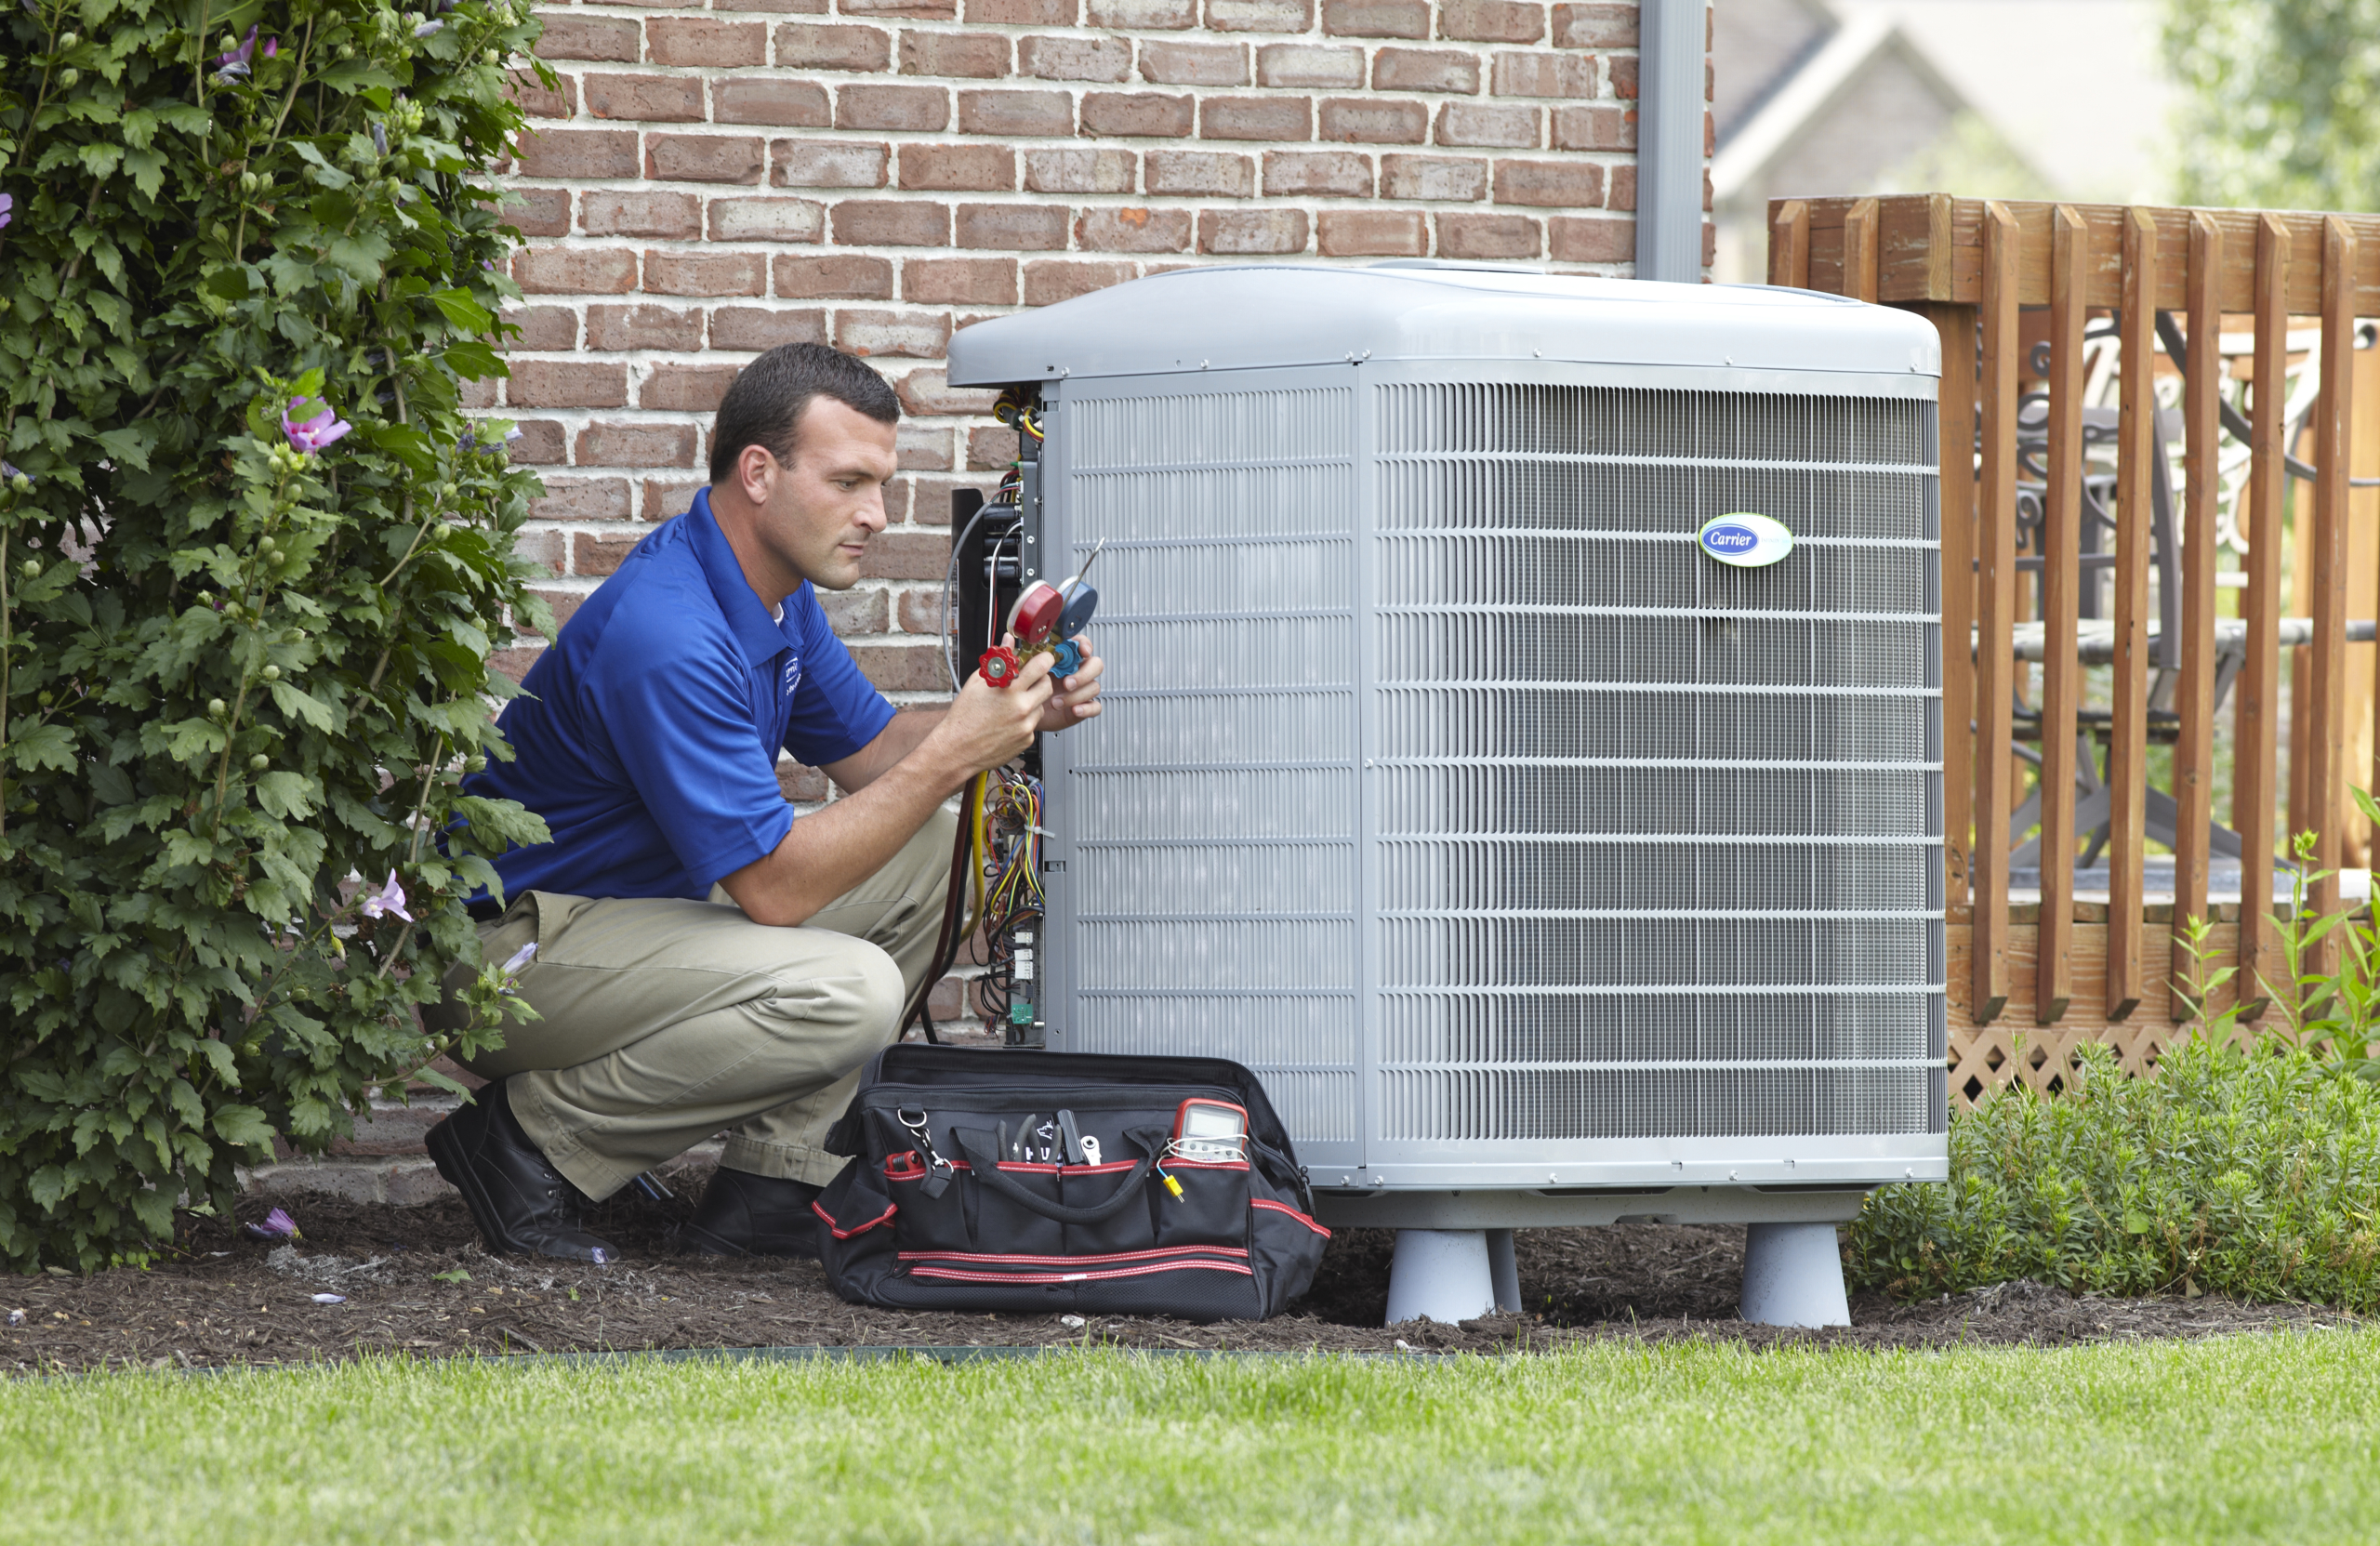 Heating and Cooling-HVAC service tech repairing an air conditioner